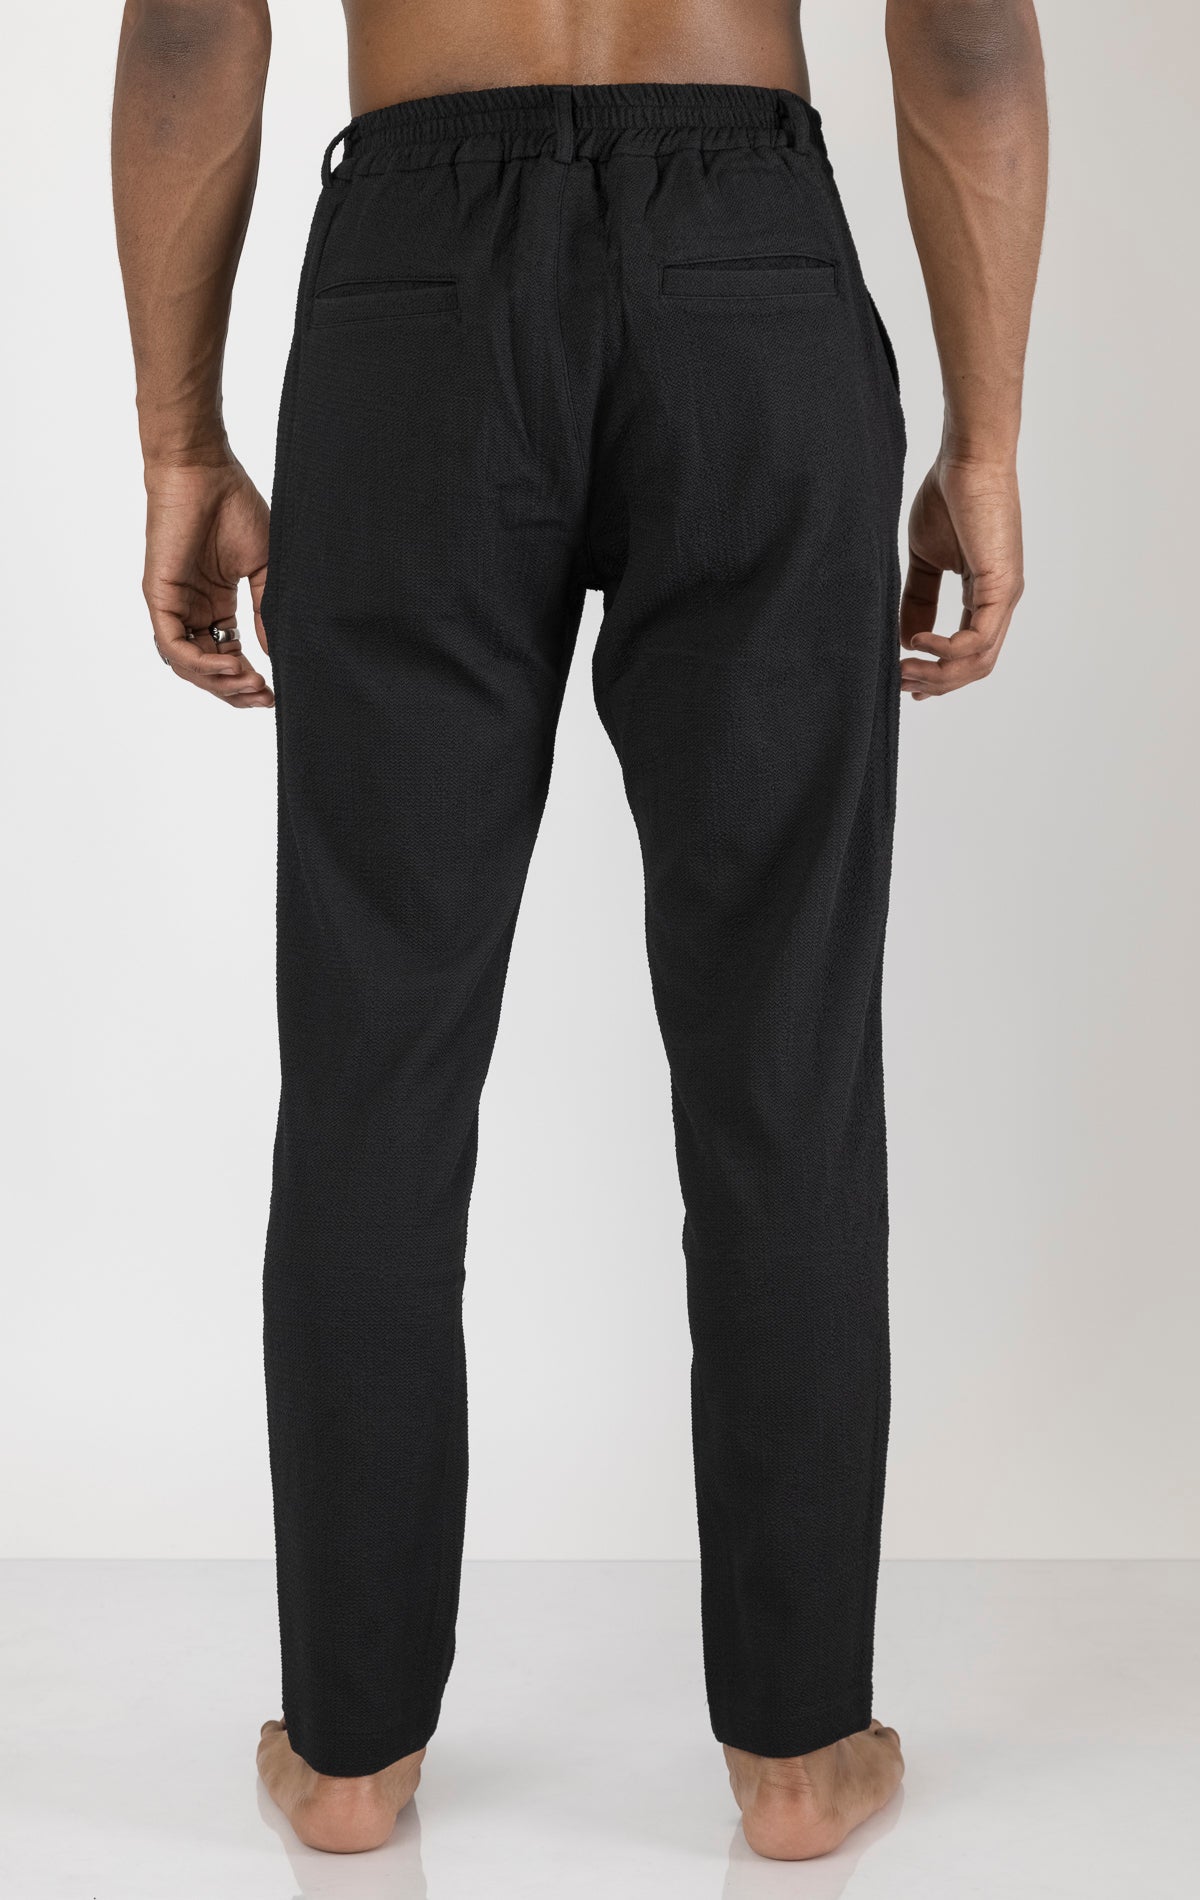 Men's front pleated waffle pants in black. The pants are made from a textured waffle fabric (95% cotton, 5% elastane) and feature a relaxed fit, front pleats, and a comfortable elastic waistband.